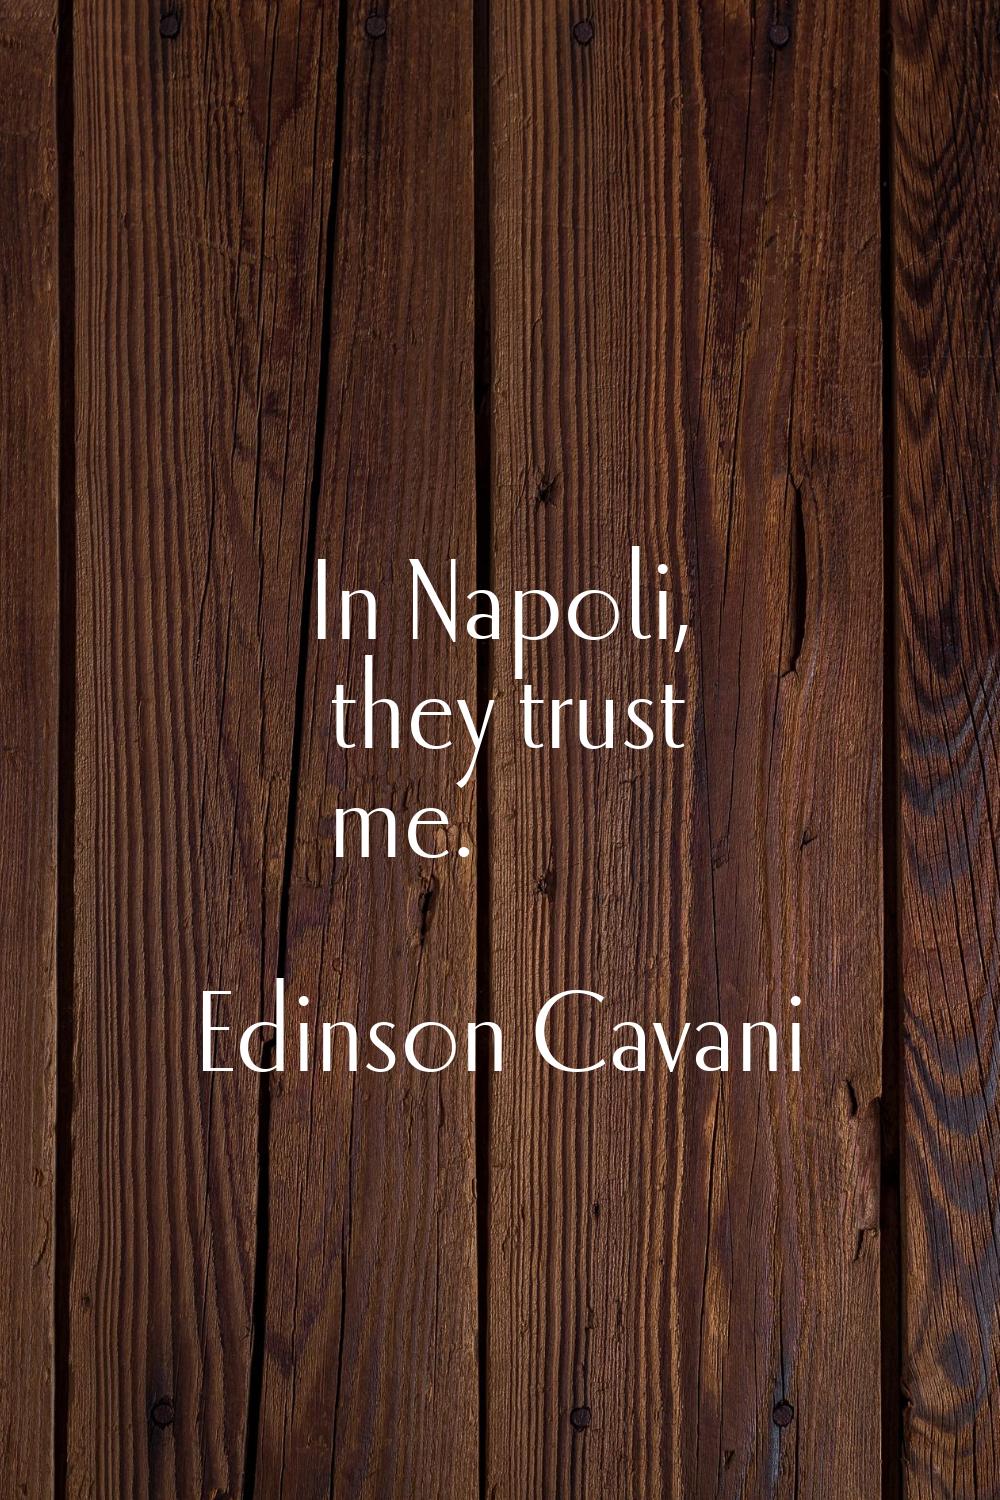 In Napoli, they trust me.